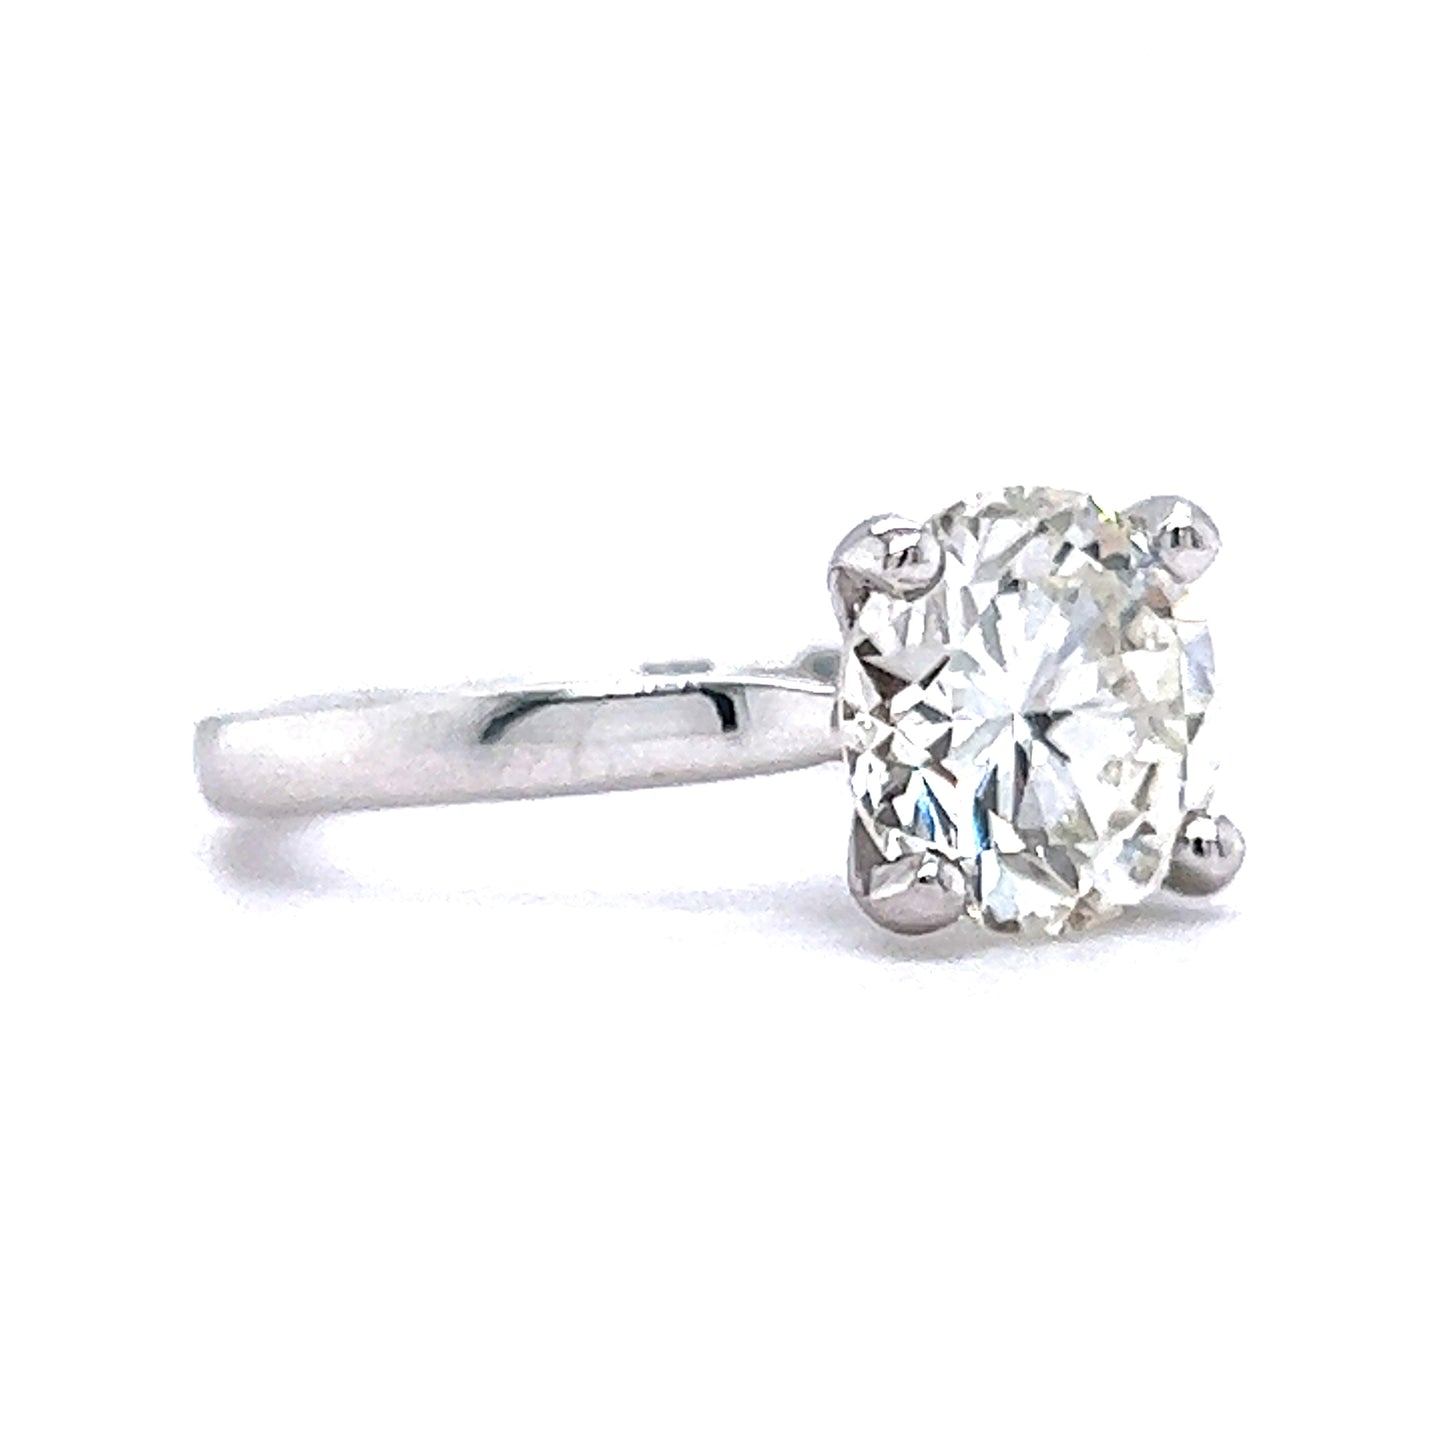 2.55 GIA Diamond Solitaire Engagement Ring in 14k White Gold